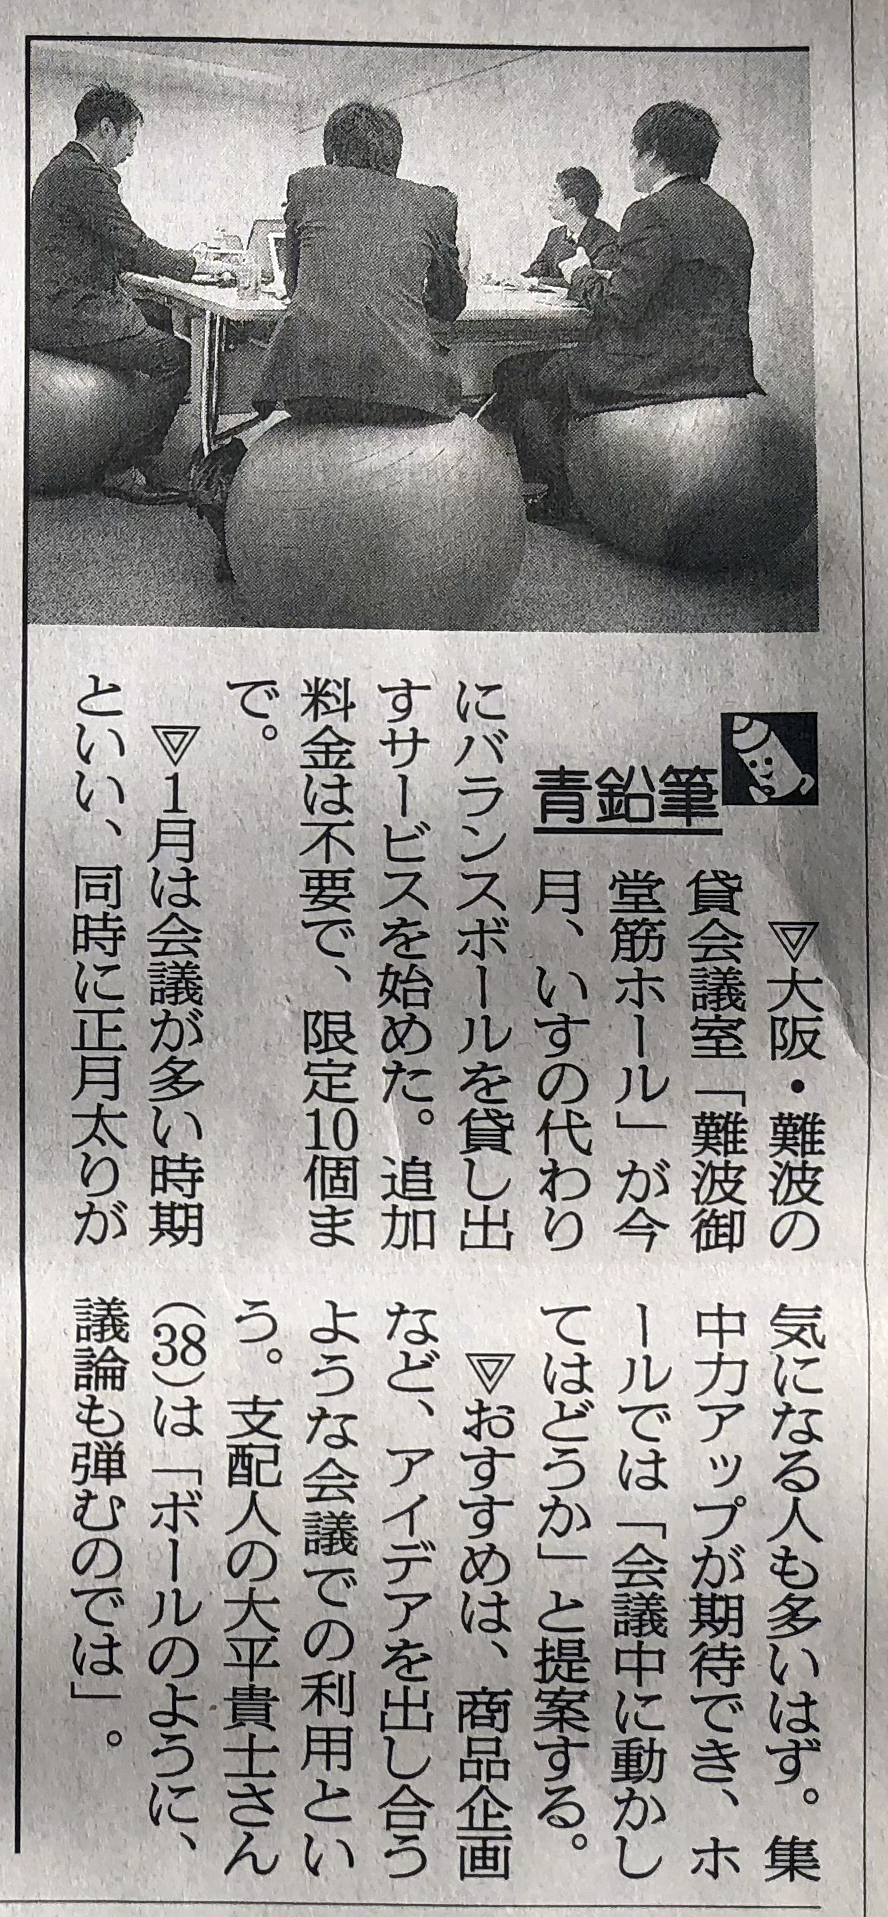 20180120_nmh_朝日新聞_バランスボール会議